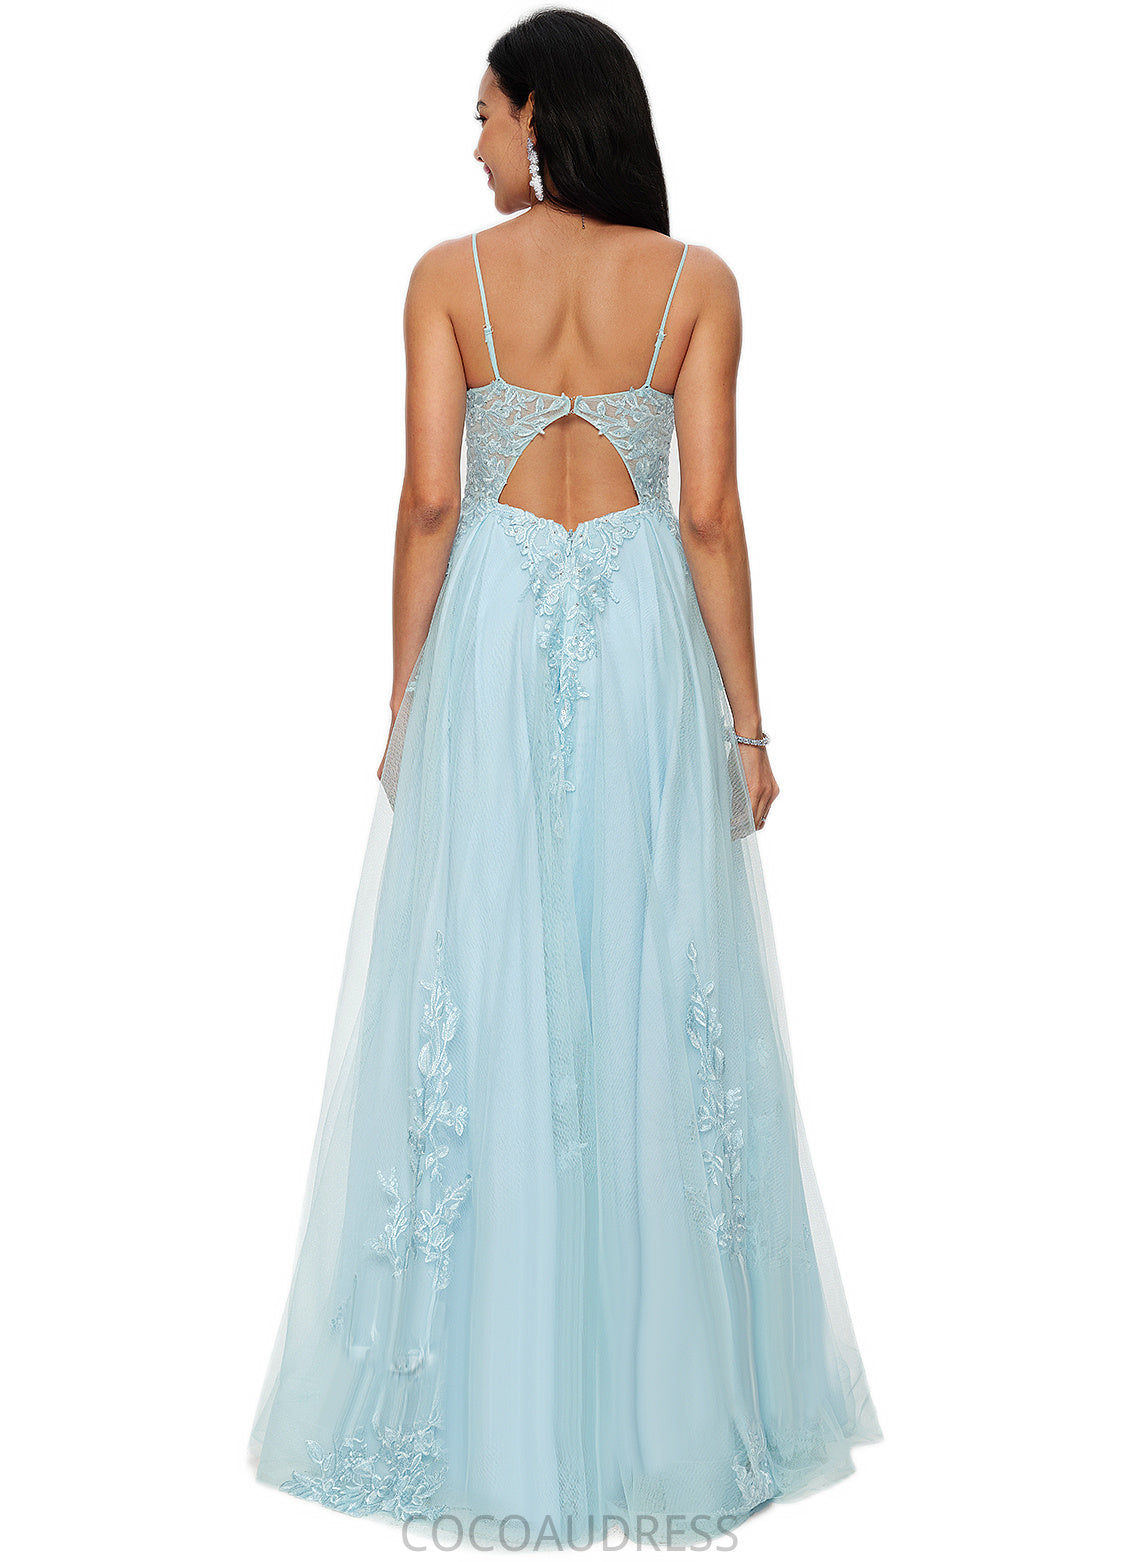 Marlene A-line V-Neck Floor-Length Tulle Prom Dresses With Rhinestone Appliques Lace Sequins P0022225